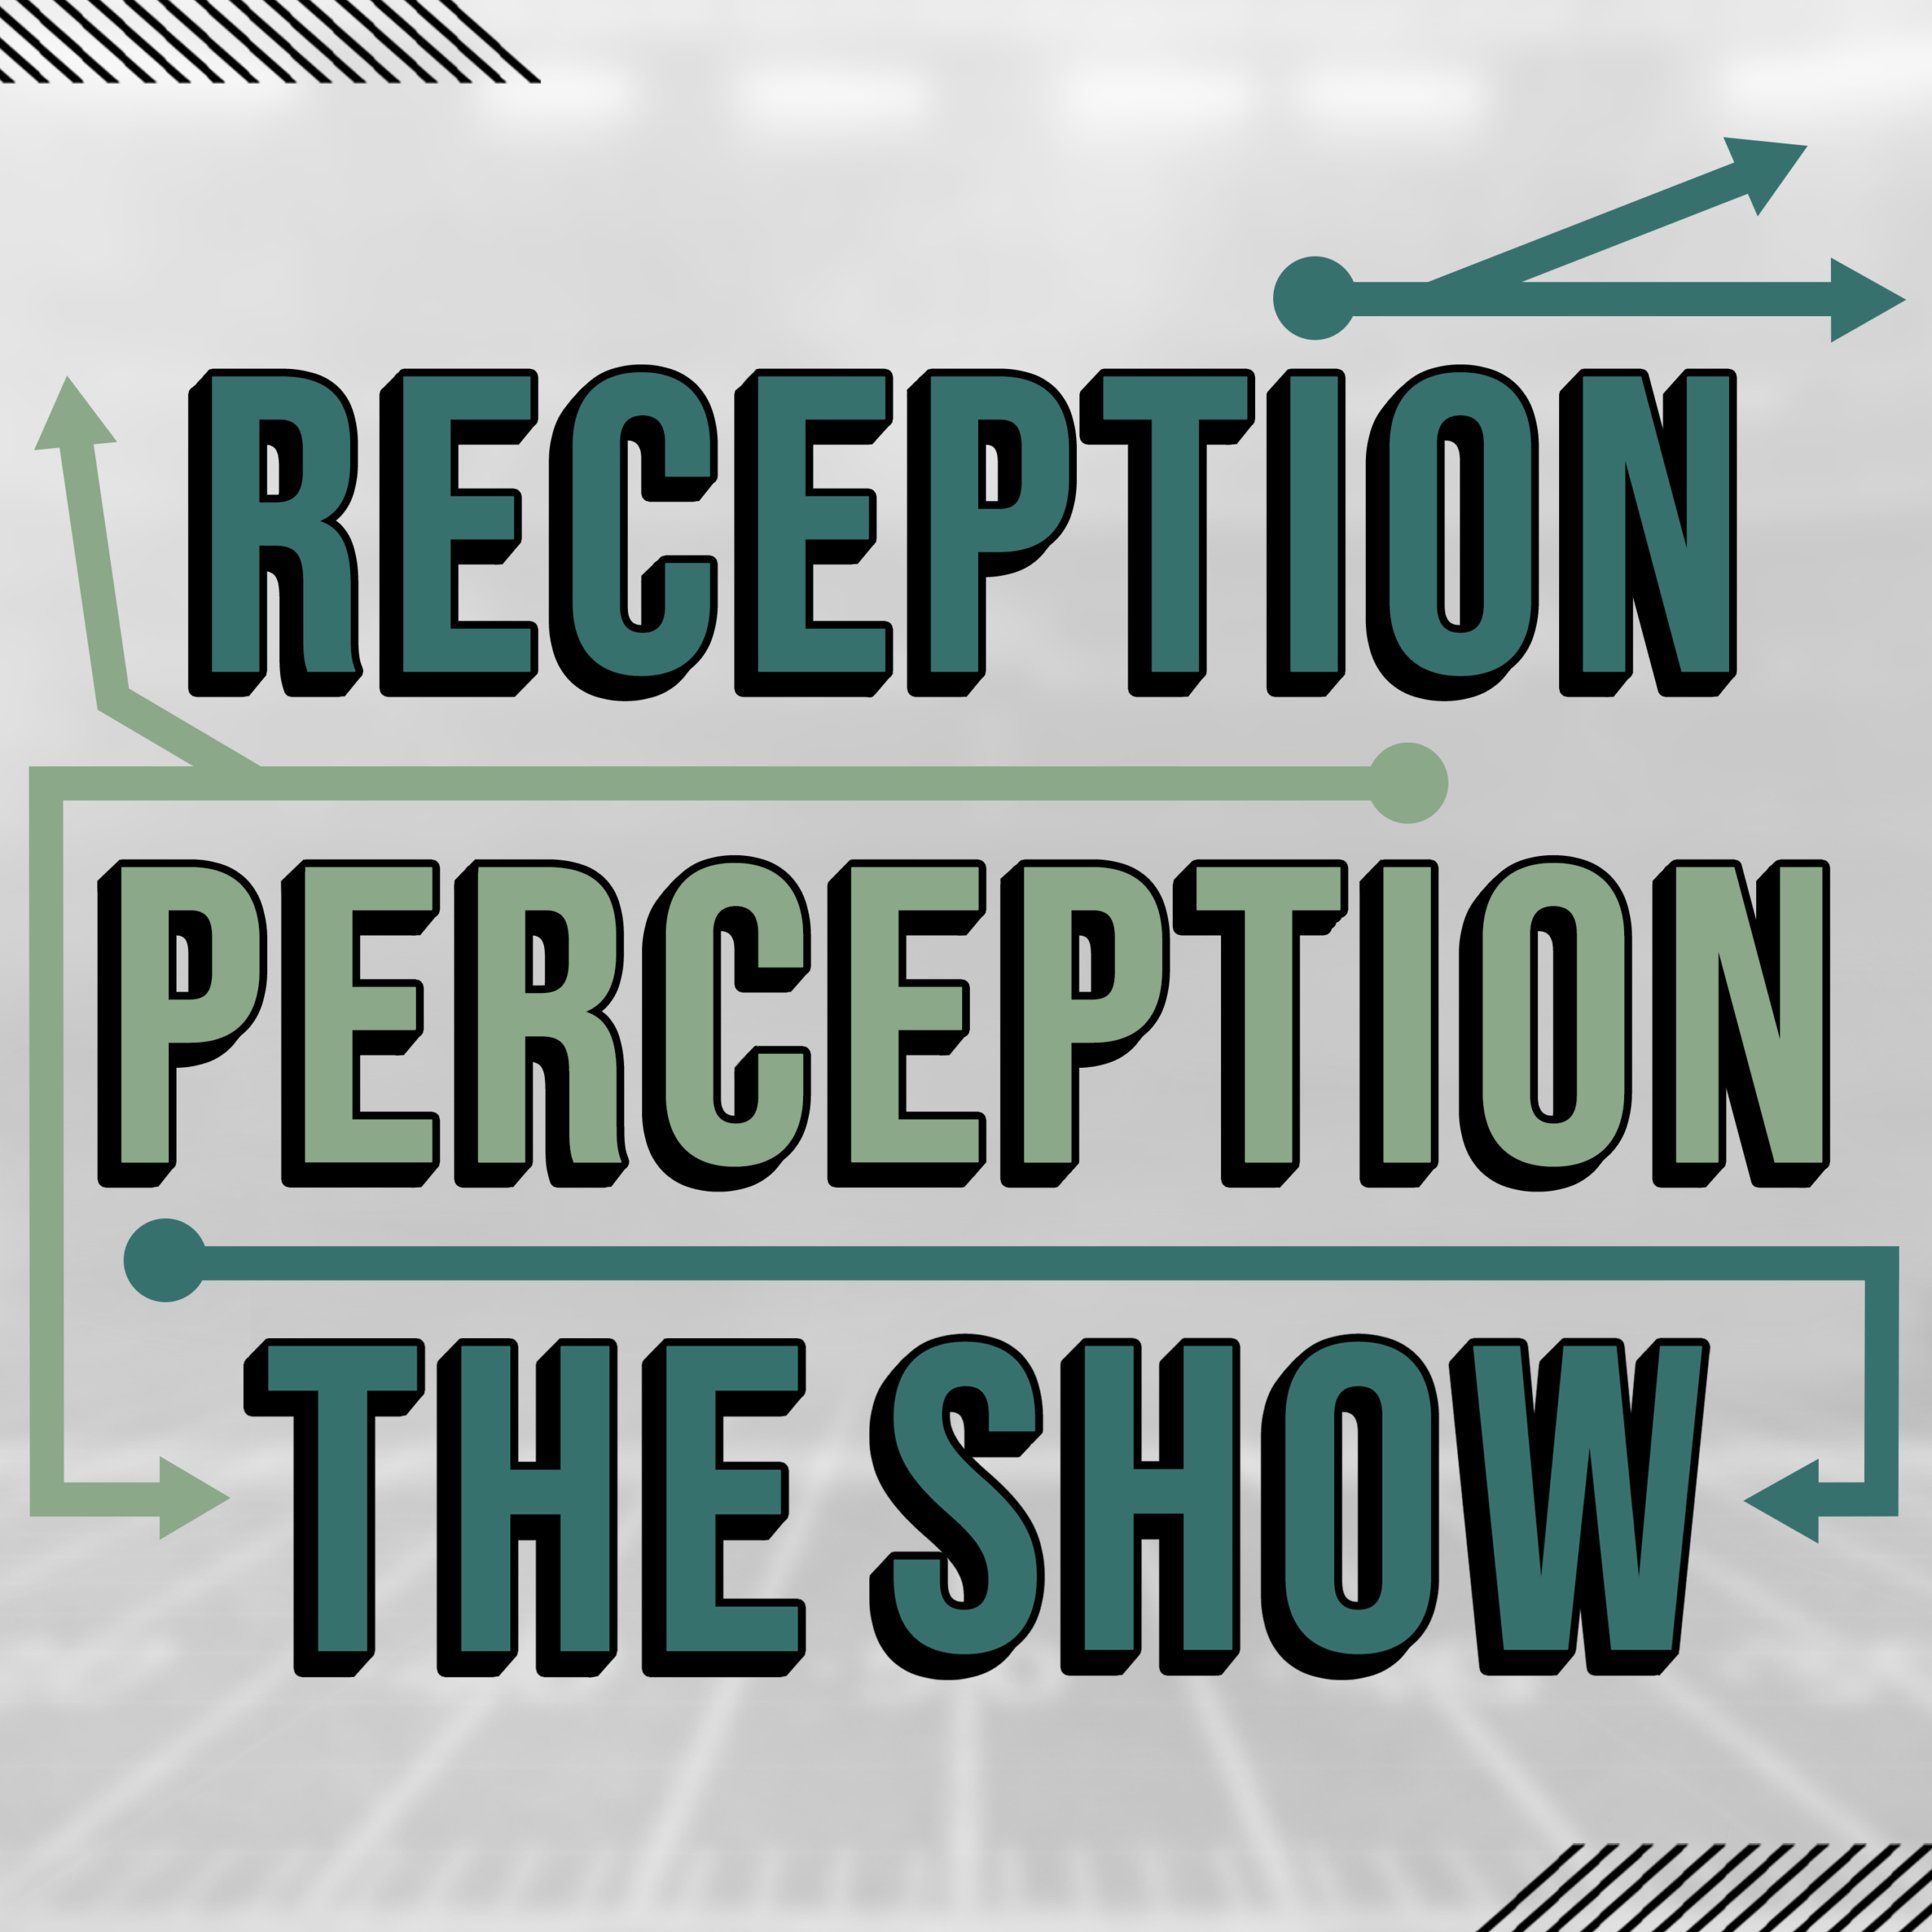 Reception Perception The Show – Receivers Elevated Offenses in Week One